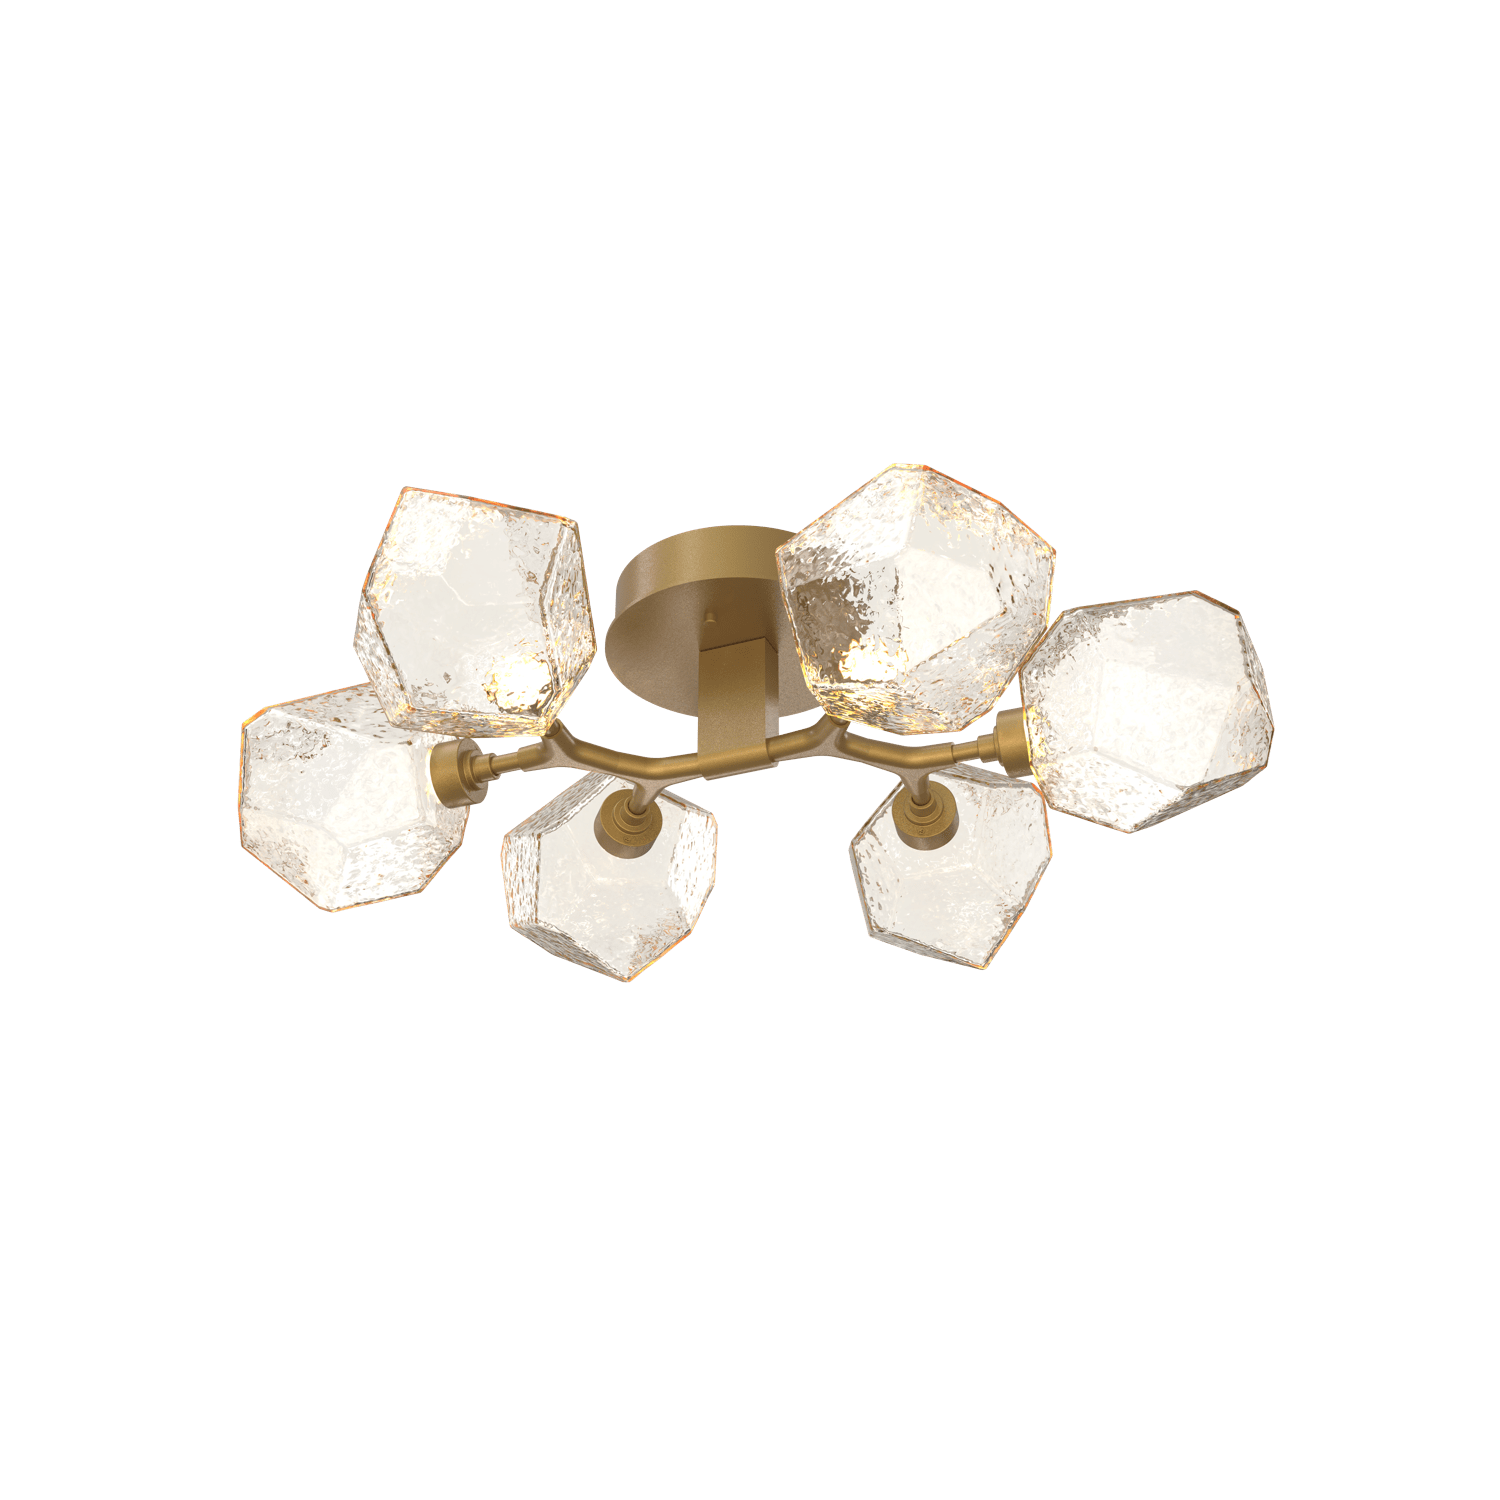 CLB0039-01-GB-A-Hammerton-Studio-Gem-6-light-organic-flush-mount-light-with-gilded-brass-finish-and-amber-blown-glass-shades-and-LED-lamping